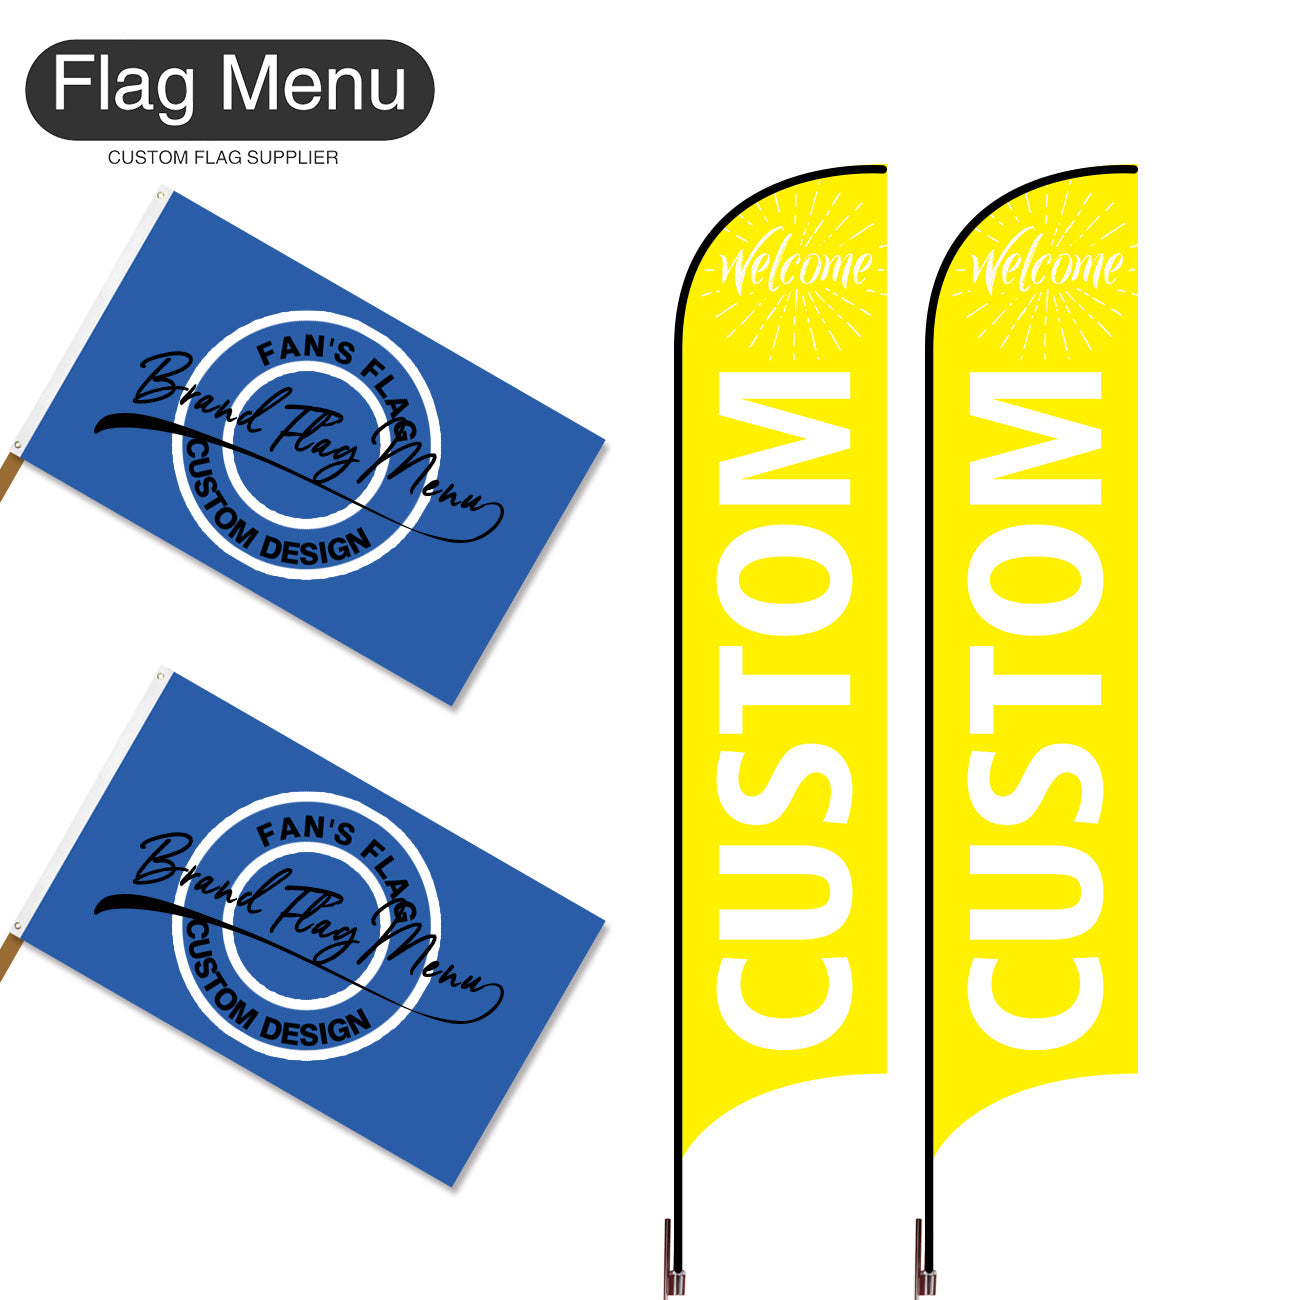 Outdoor Advertising Set - C-Yellow B-S - Feather Flag -Double Sided & 3'x5' Regular Flag -Single Sided-Cross & Water Bag-Flag Menu